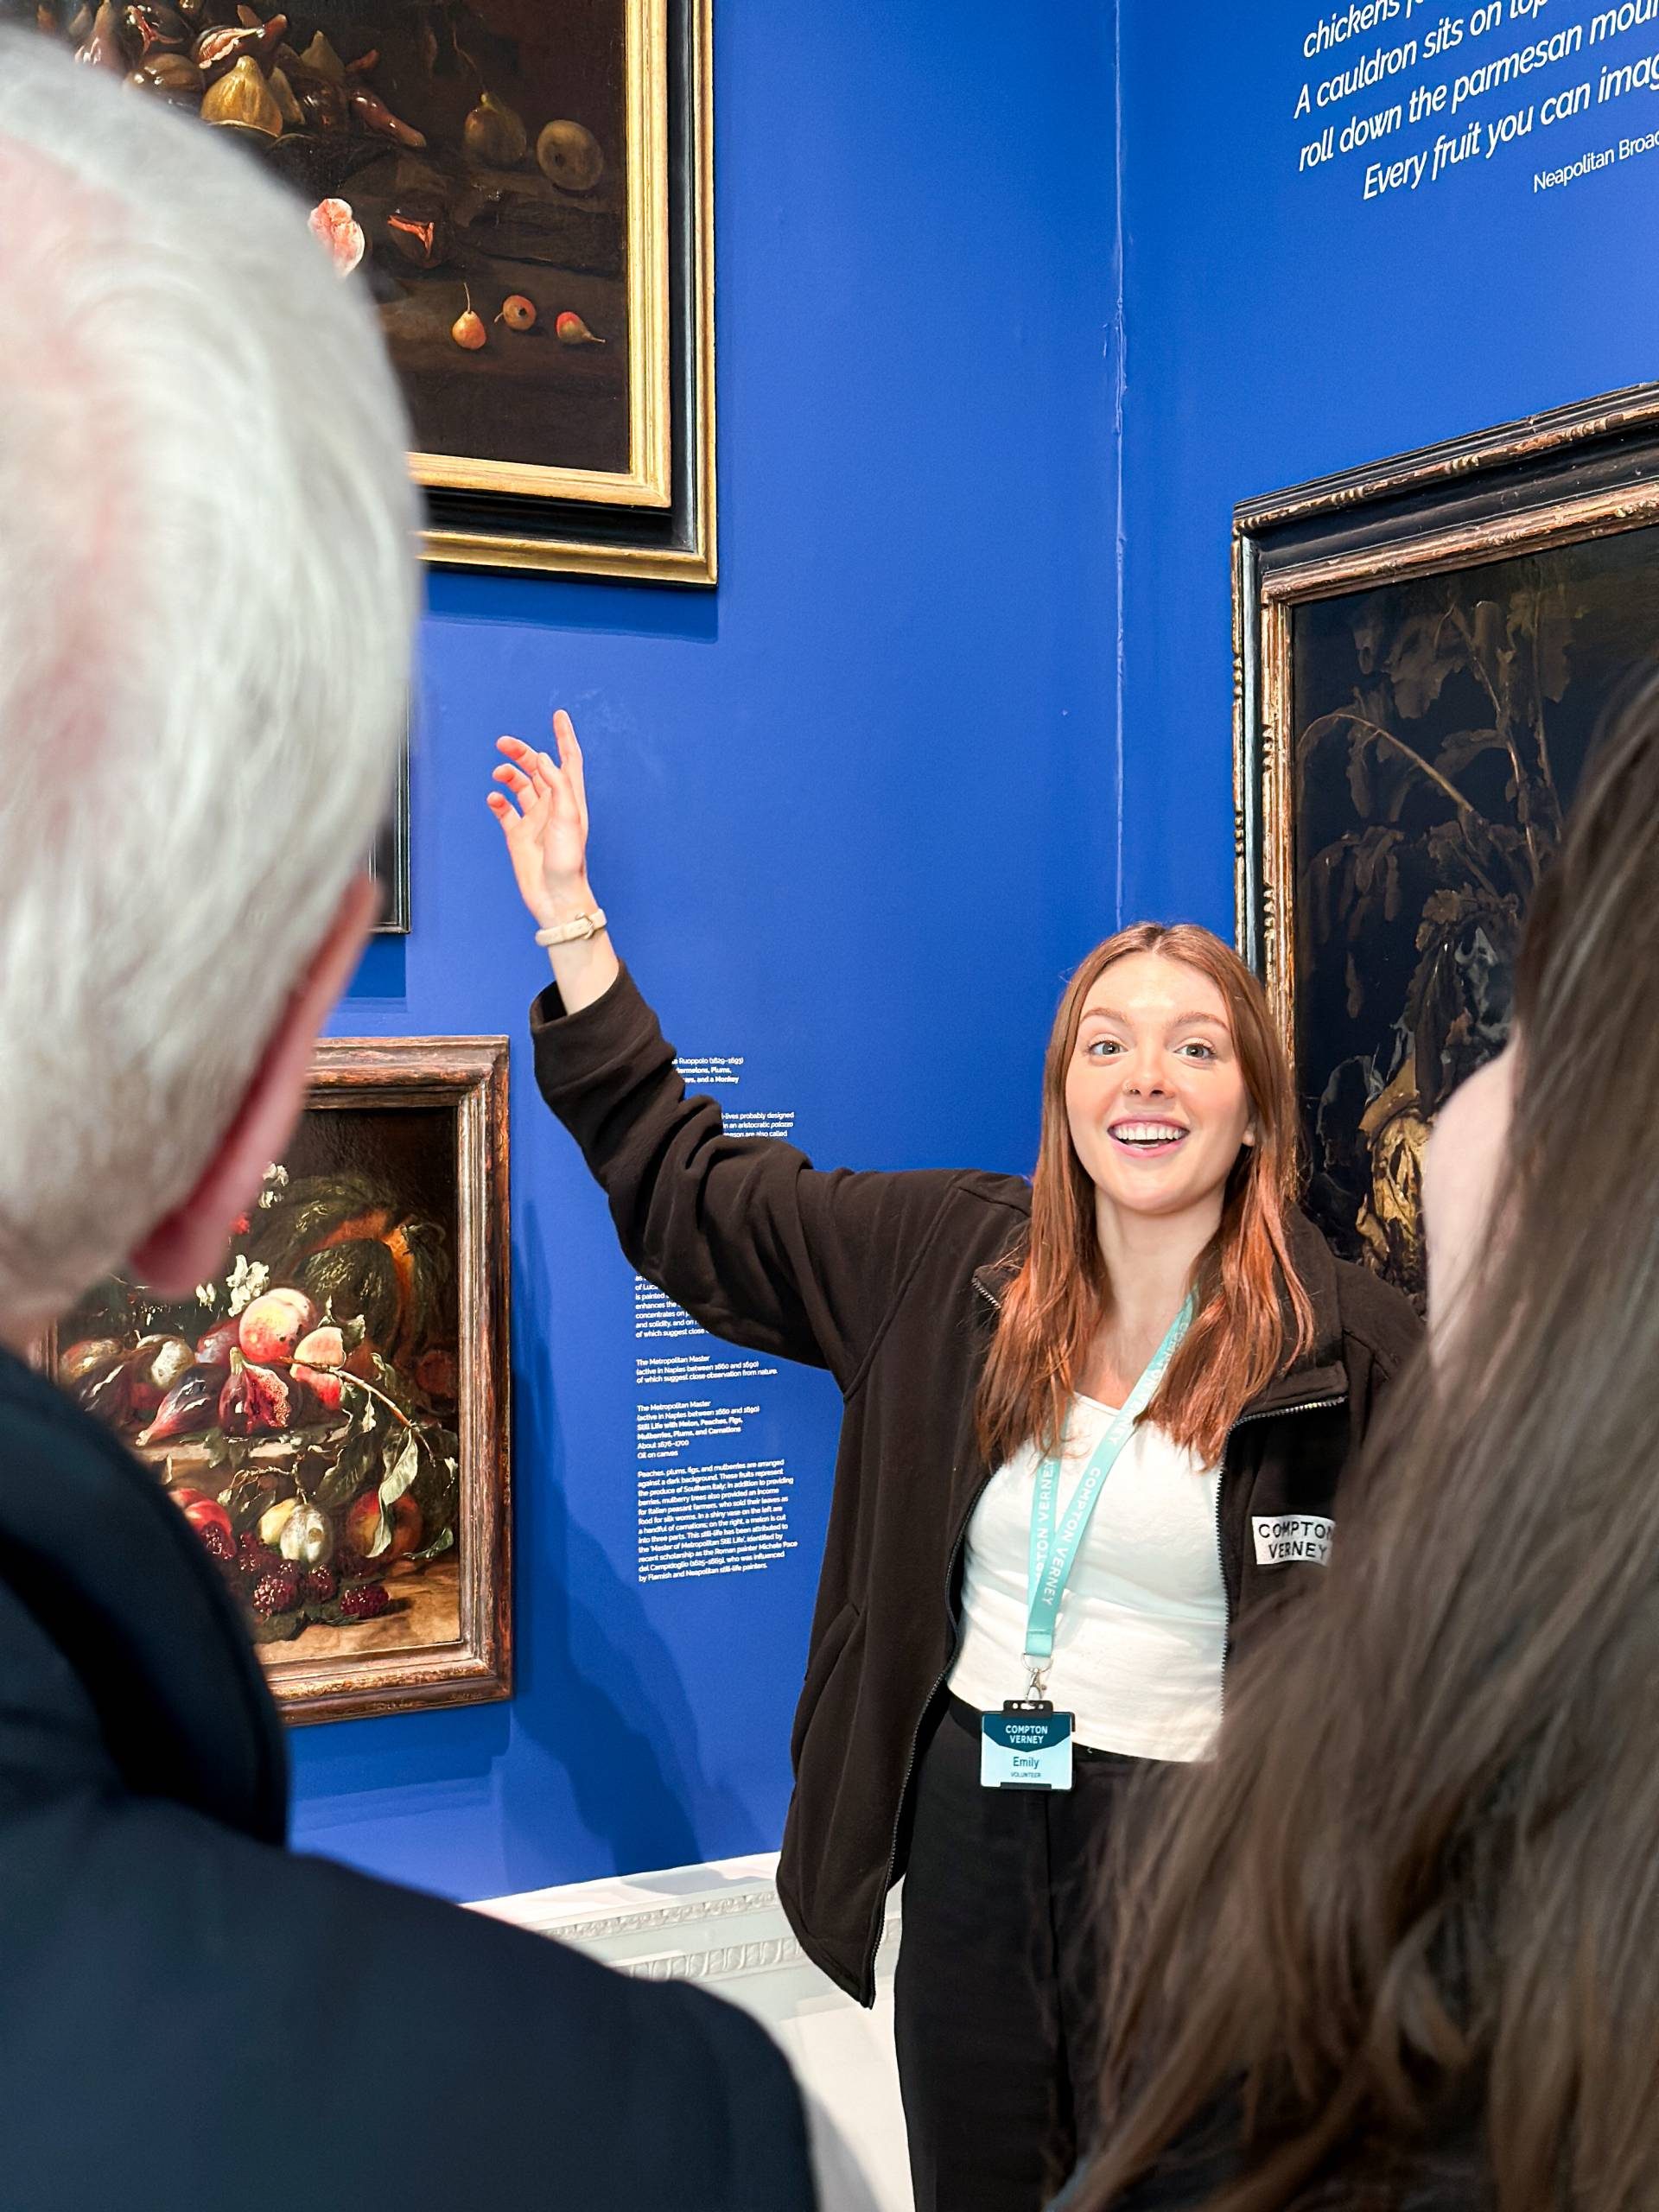 A young female volunteer in Compton Verney uniform points towards a painting on a blue wall infront of two on-lookers.